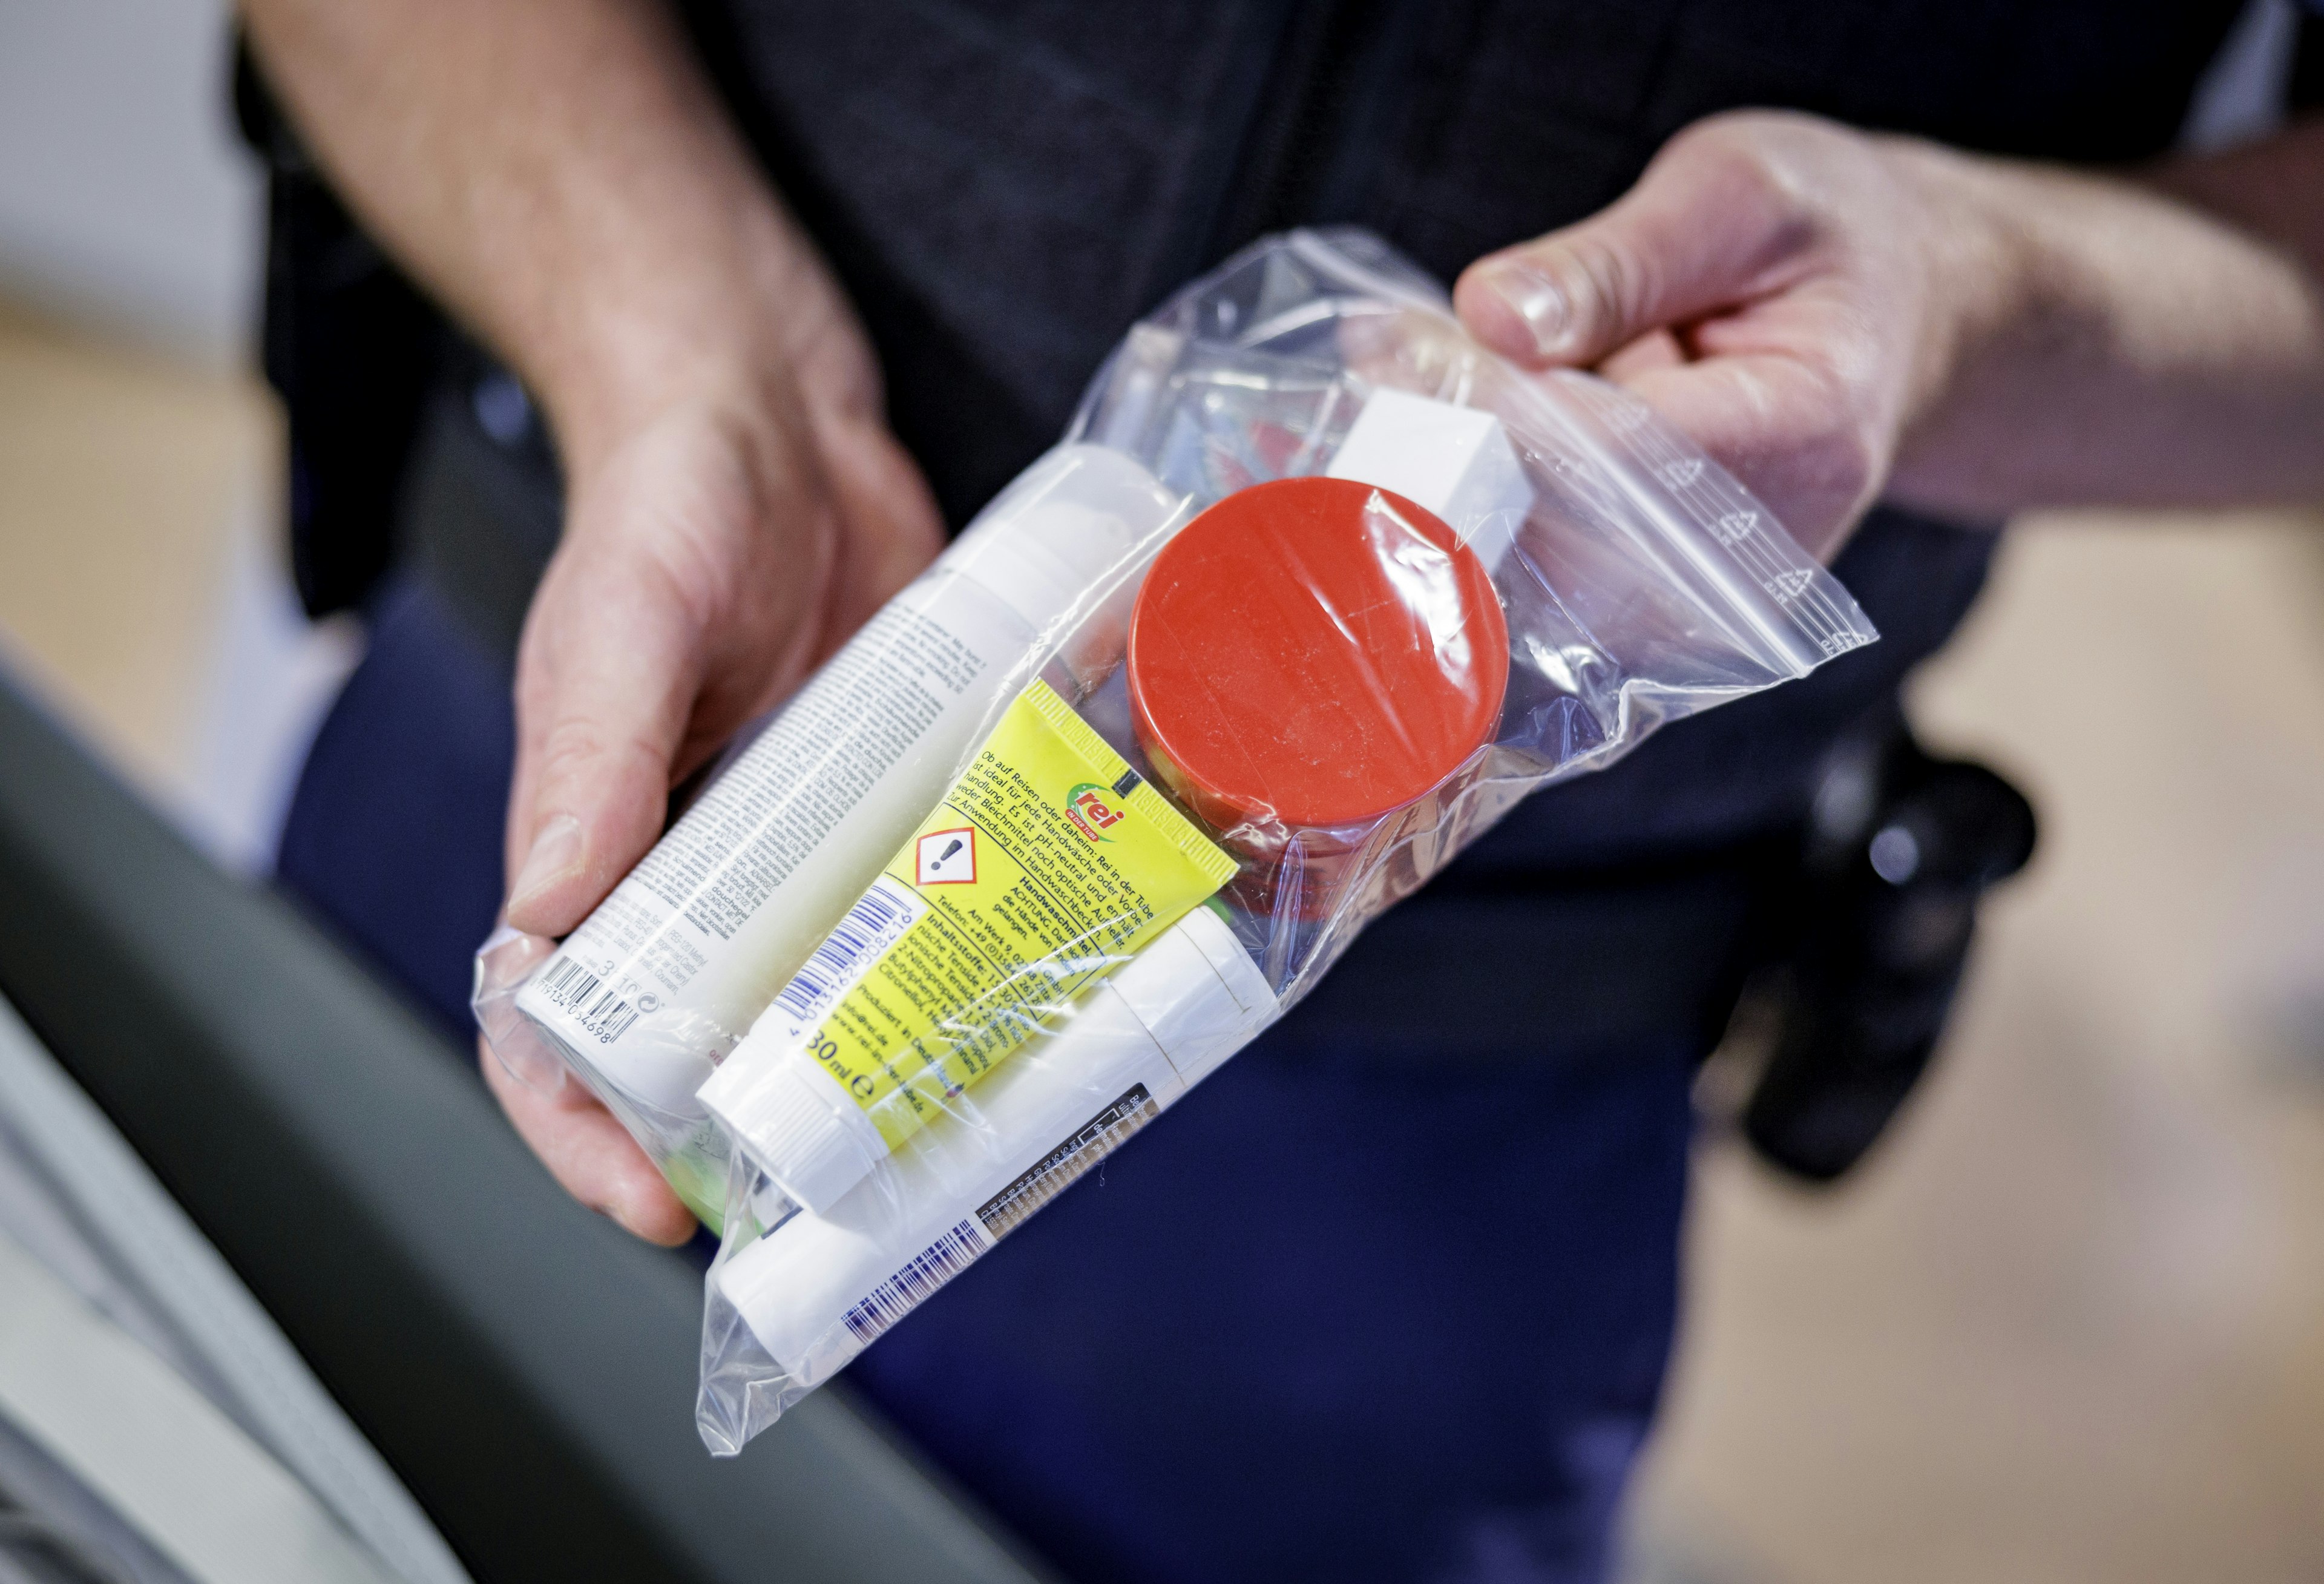 22 June 2022, Hamburg: An officer of the Federal Police shows at Hamburg Airport during the security check which quantities of liquids may be carried and how they must be packed.      (to dpa "Busy at the airport - this is how the security check works") P